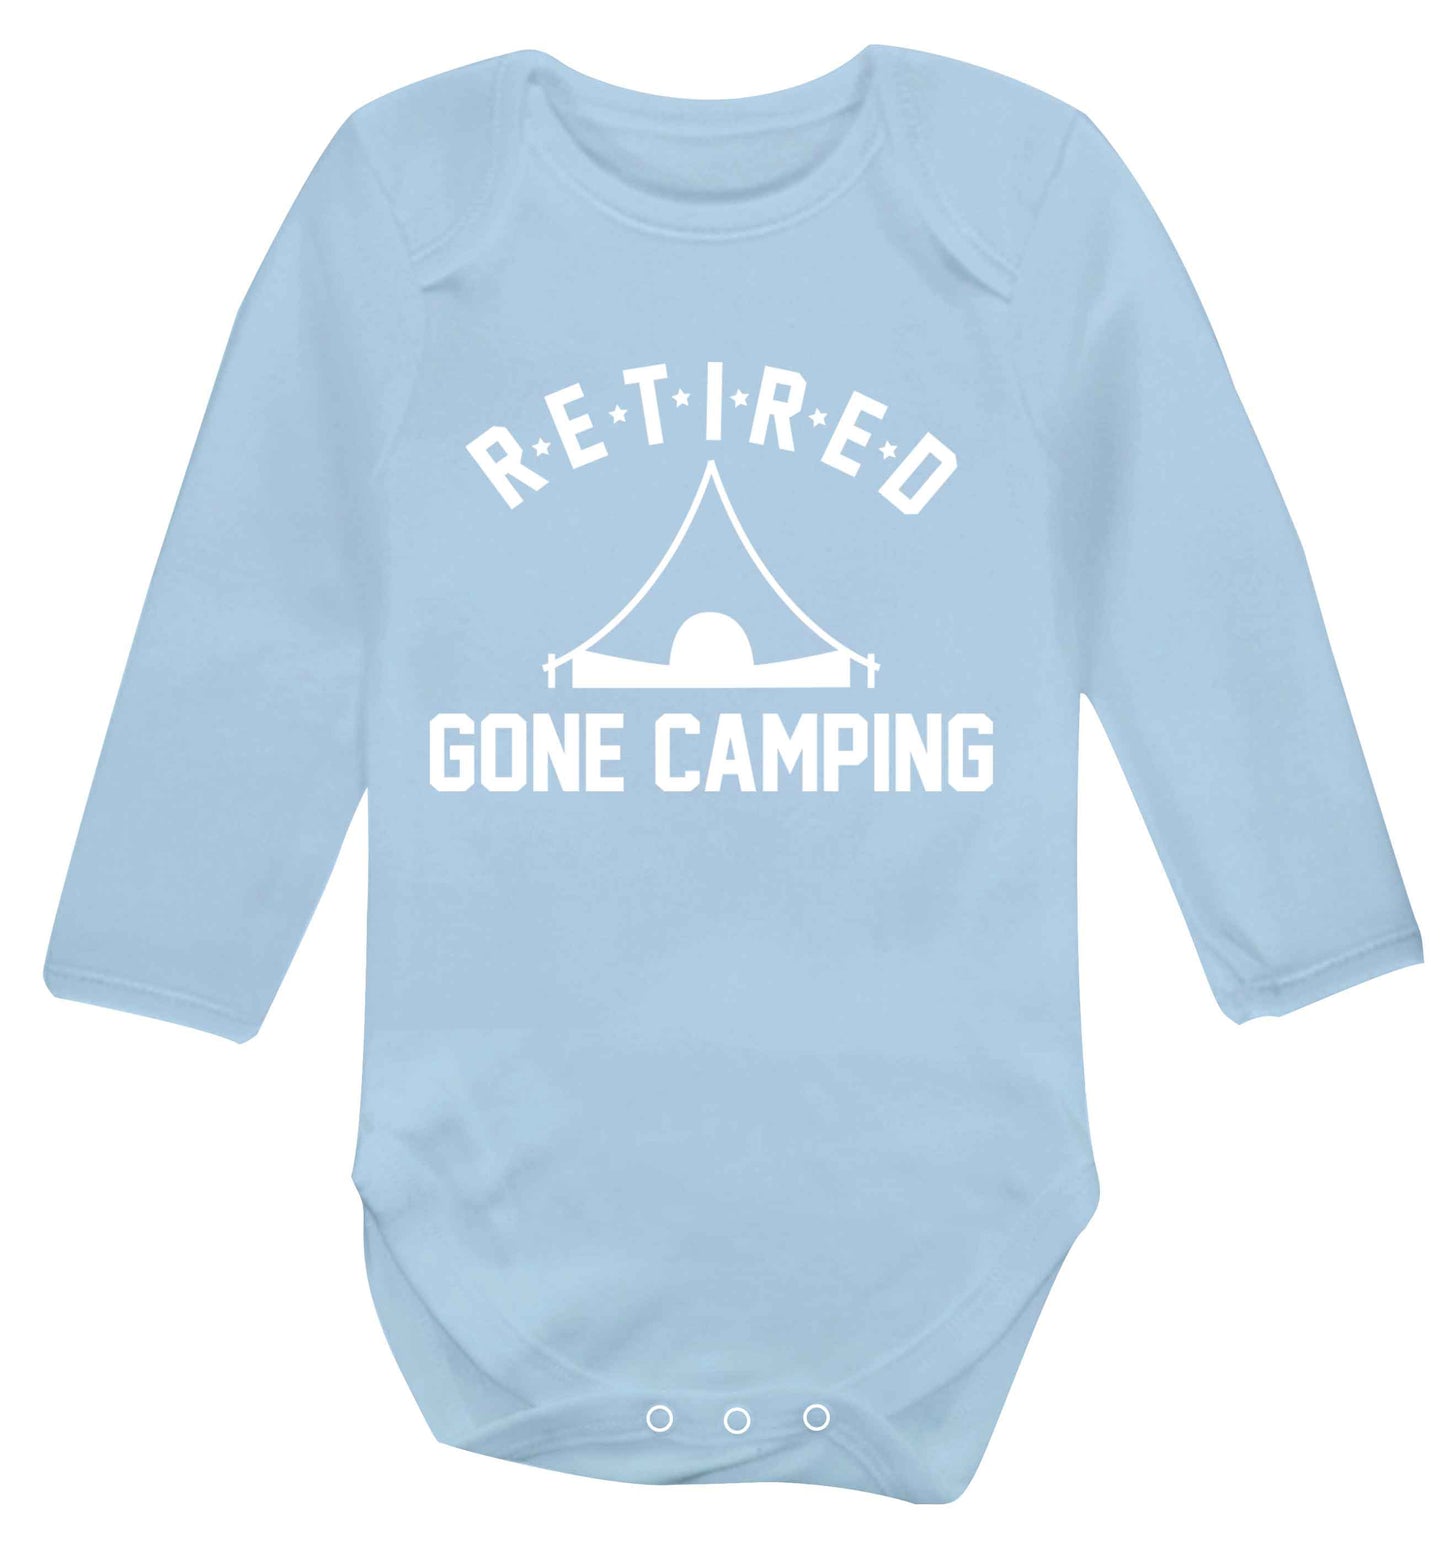 Retired gone camping Baby Vest long sleeved pale blue 6-12 months